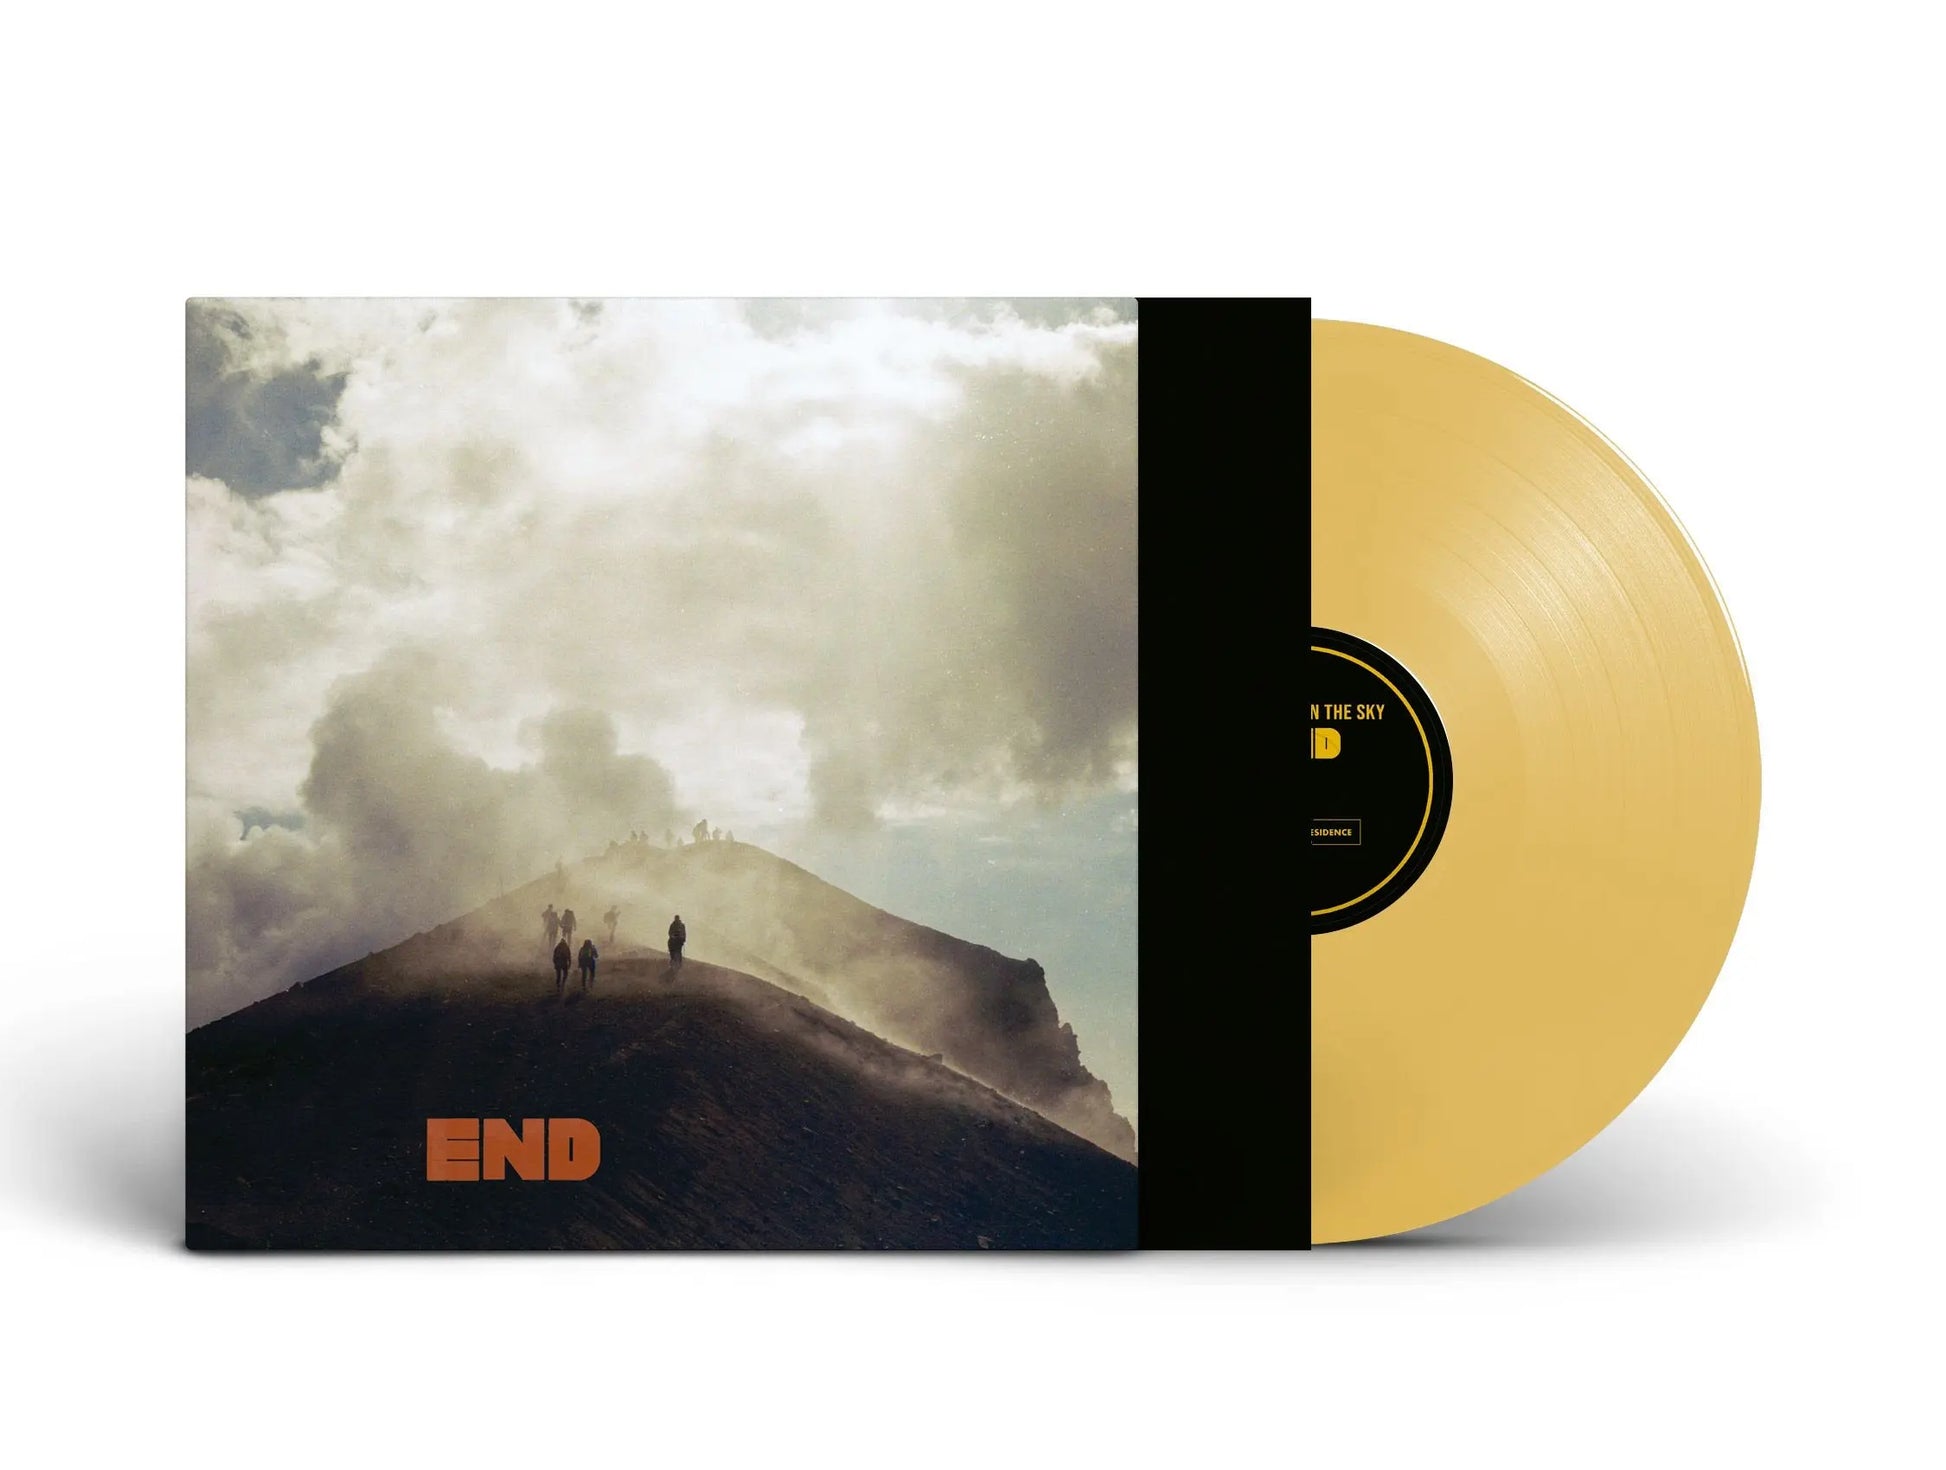 Explosions in the Sky - End [Yellow Vinyl]